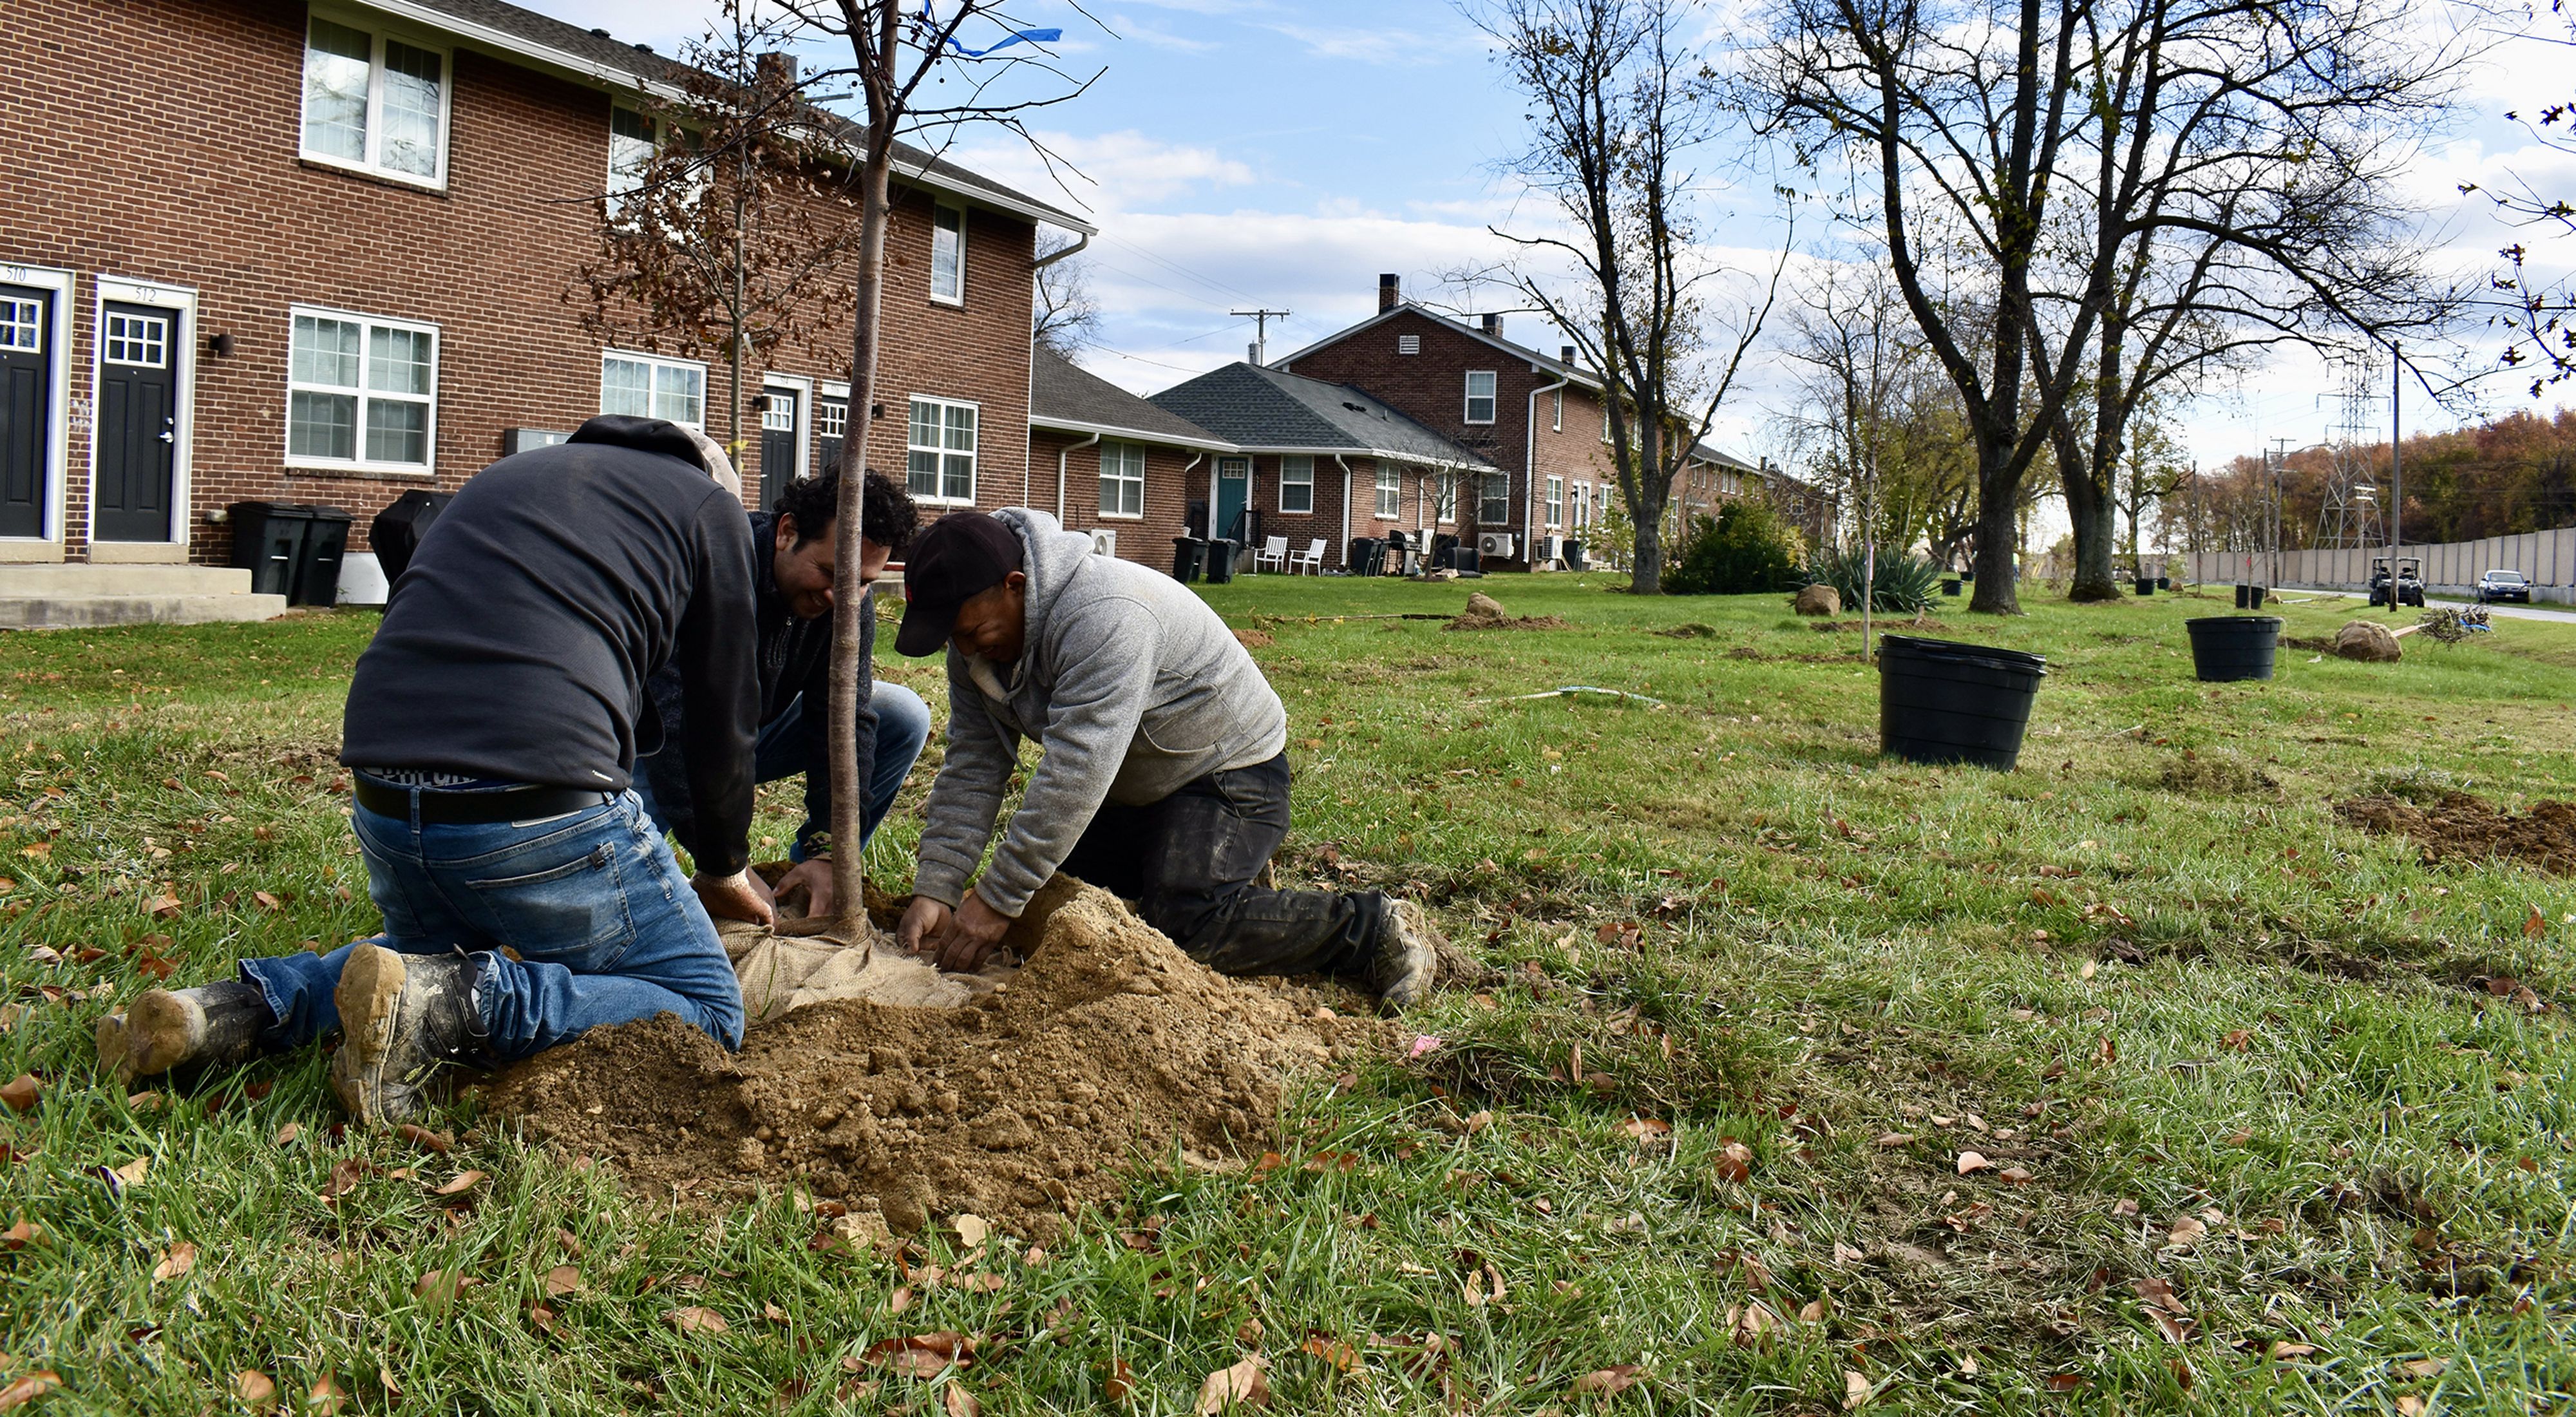 Three men plant a large tree in a narrow green space at the edge of a residential community.